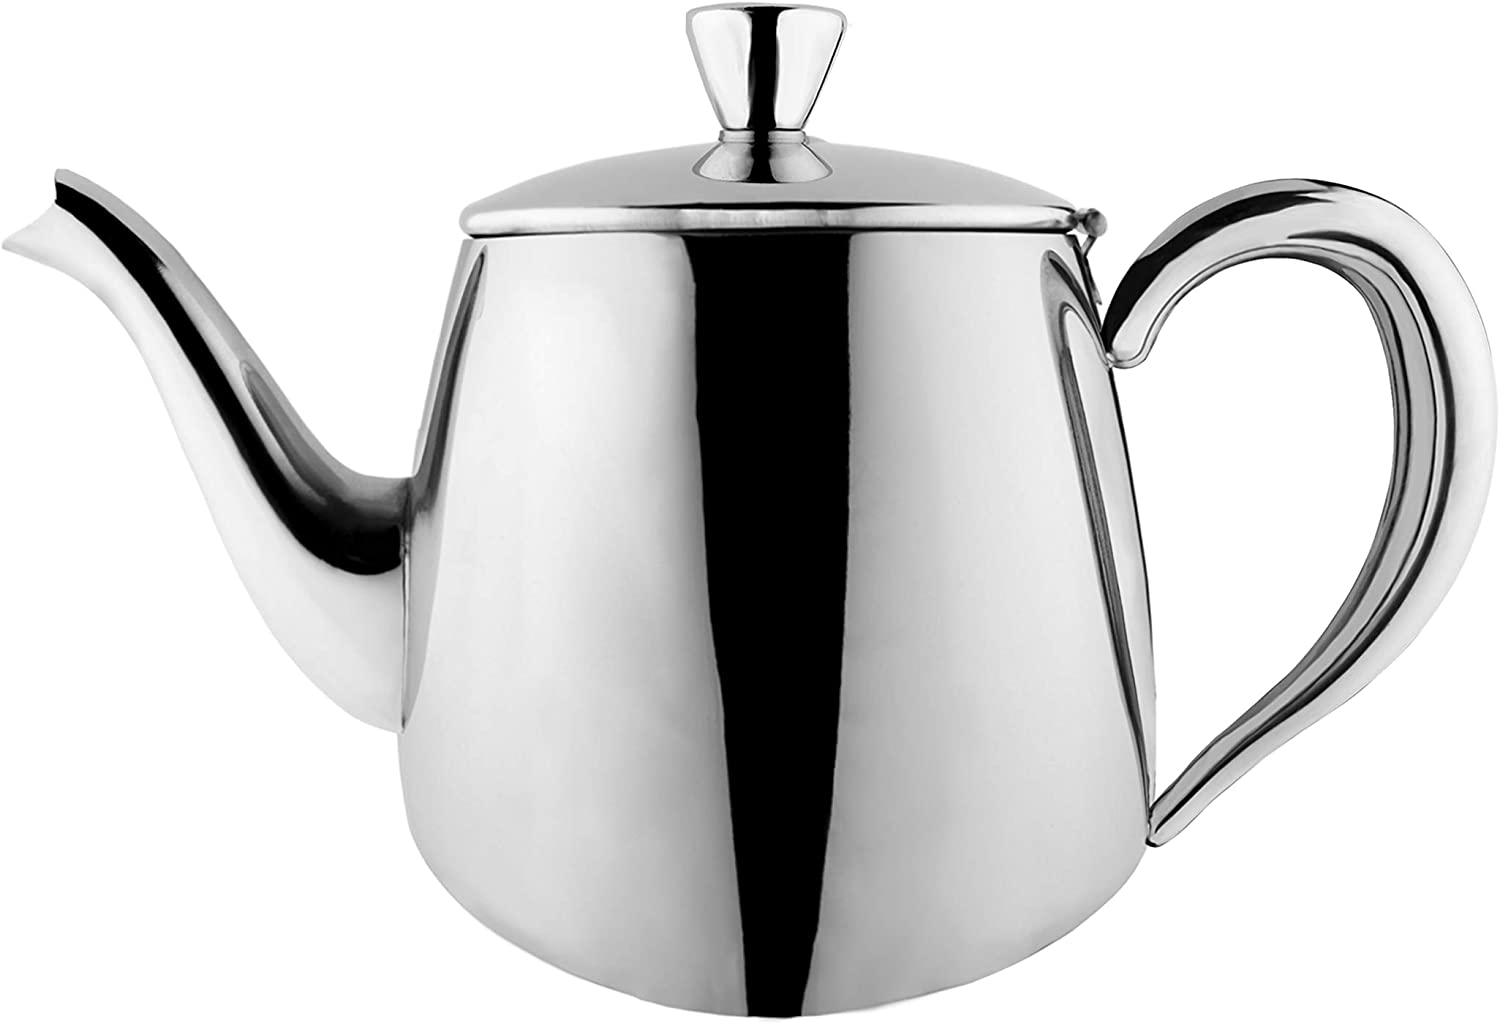 Cafe Ole PT-018 teapot, stainless steel, 18 ounces